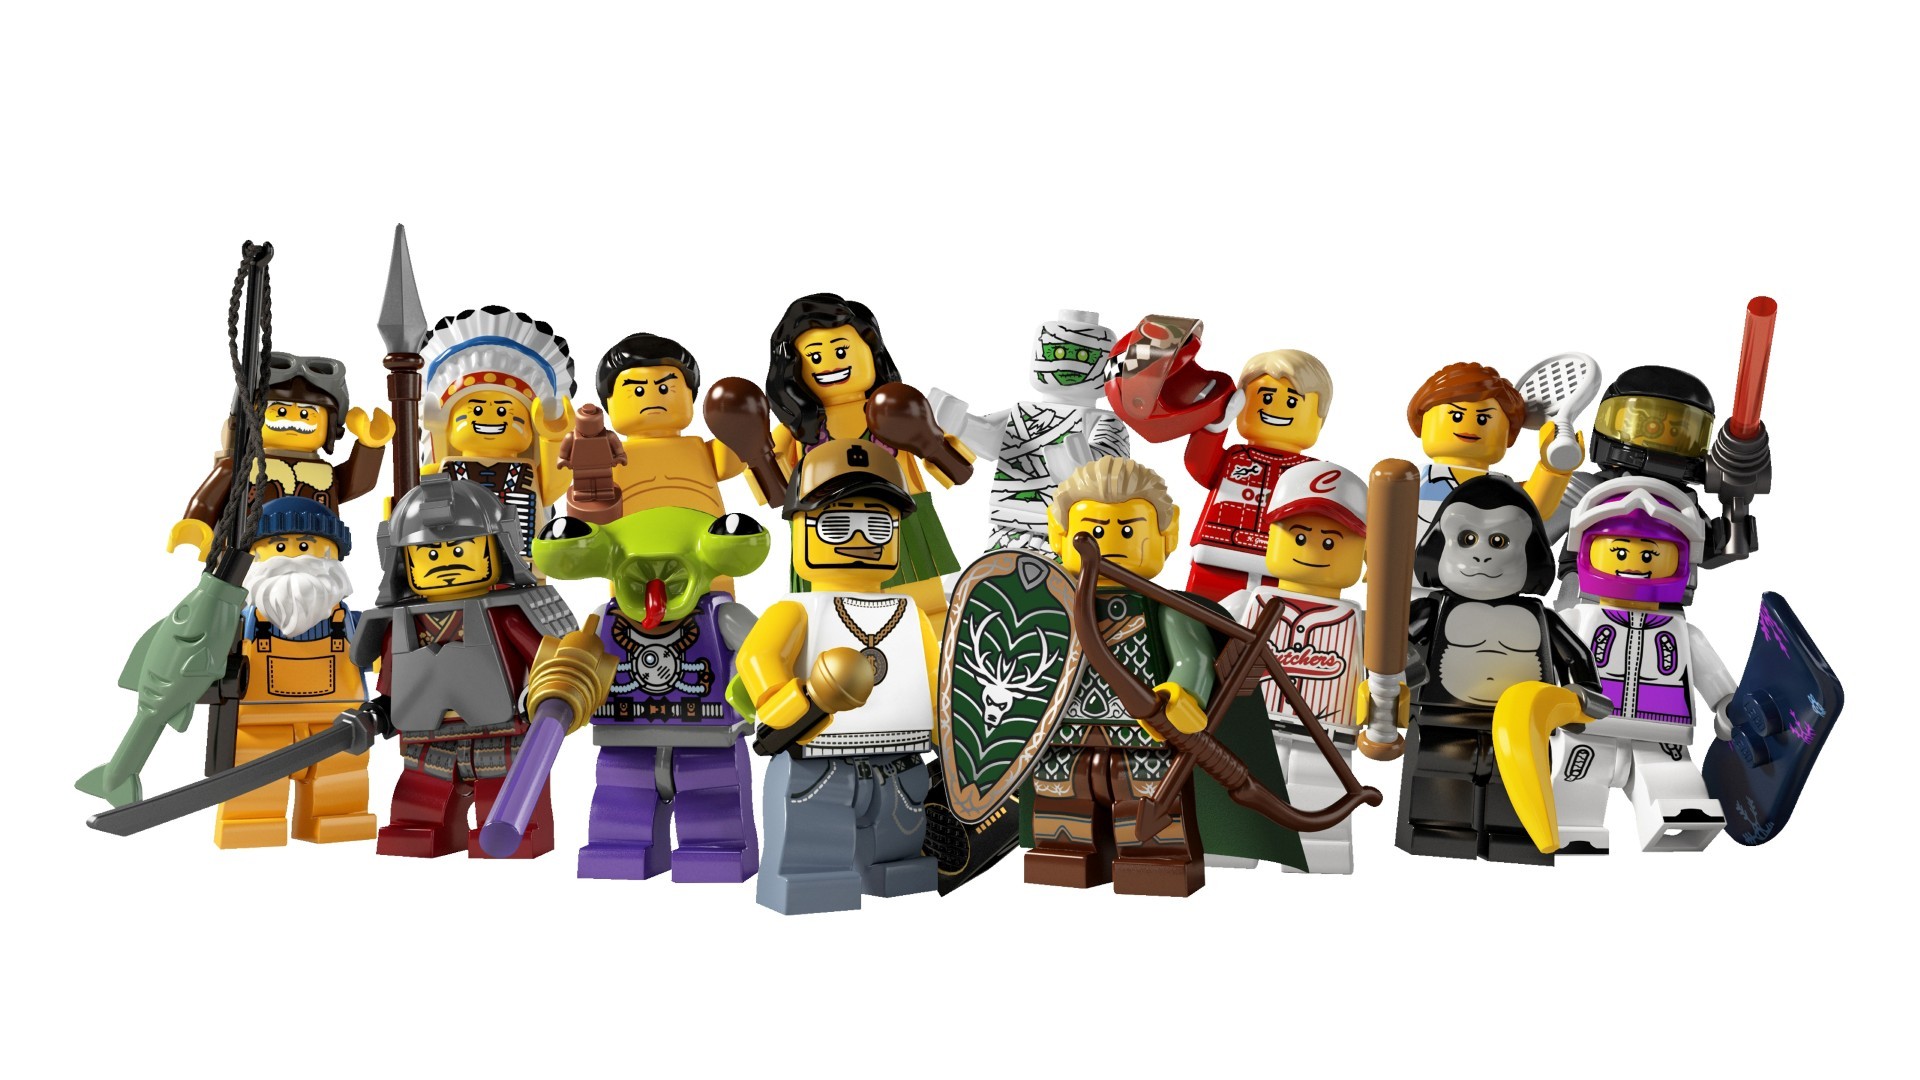 Free download LEGO Minifigures Related Image [1920x1080] for your Desktop, Mobile & Tablet. Explore LEGO Wallpaper for Kids Room. Wallpaper for Boys Room